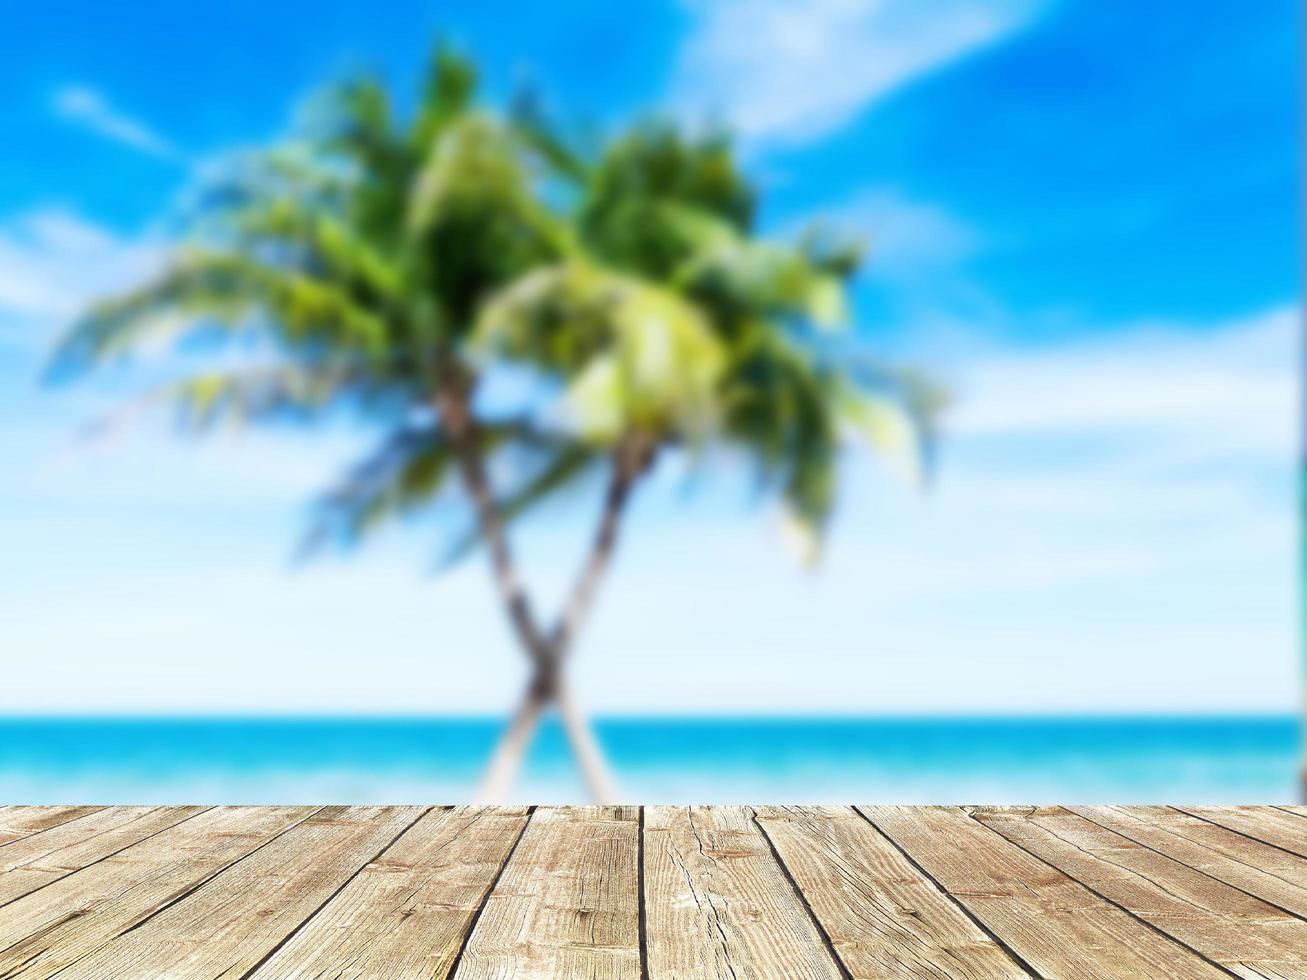 Beach palm trees with pale wooden floor product display background photo